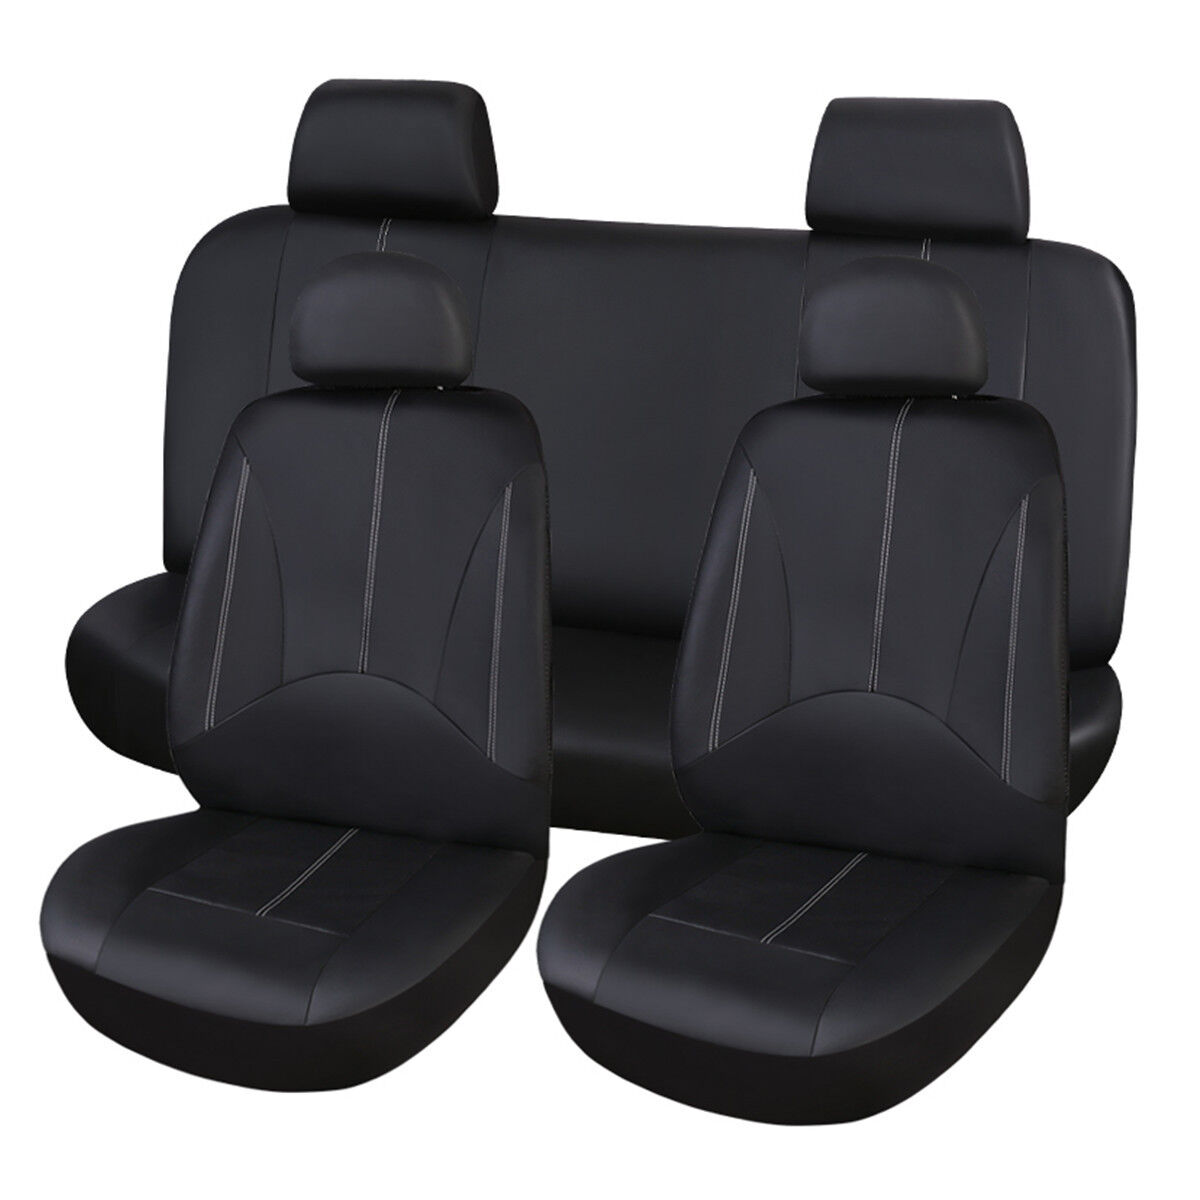 PU Leather Black Car Seat Cover Full Set Front Rear Seat Cushion Mat Protector